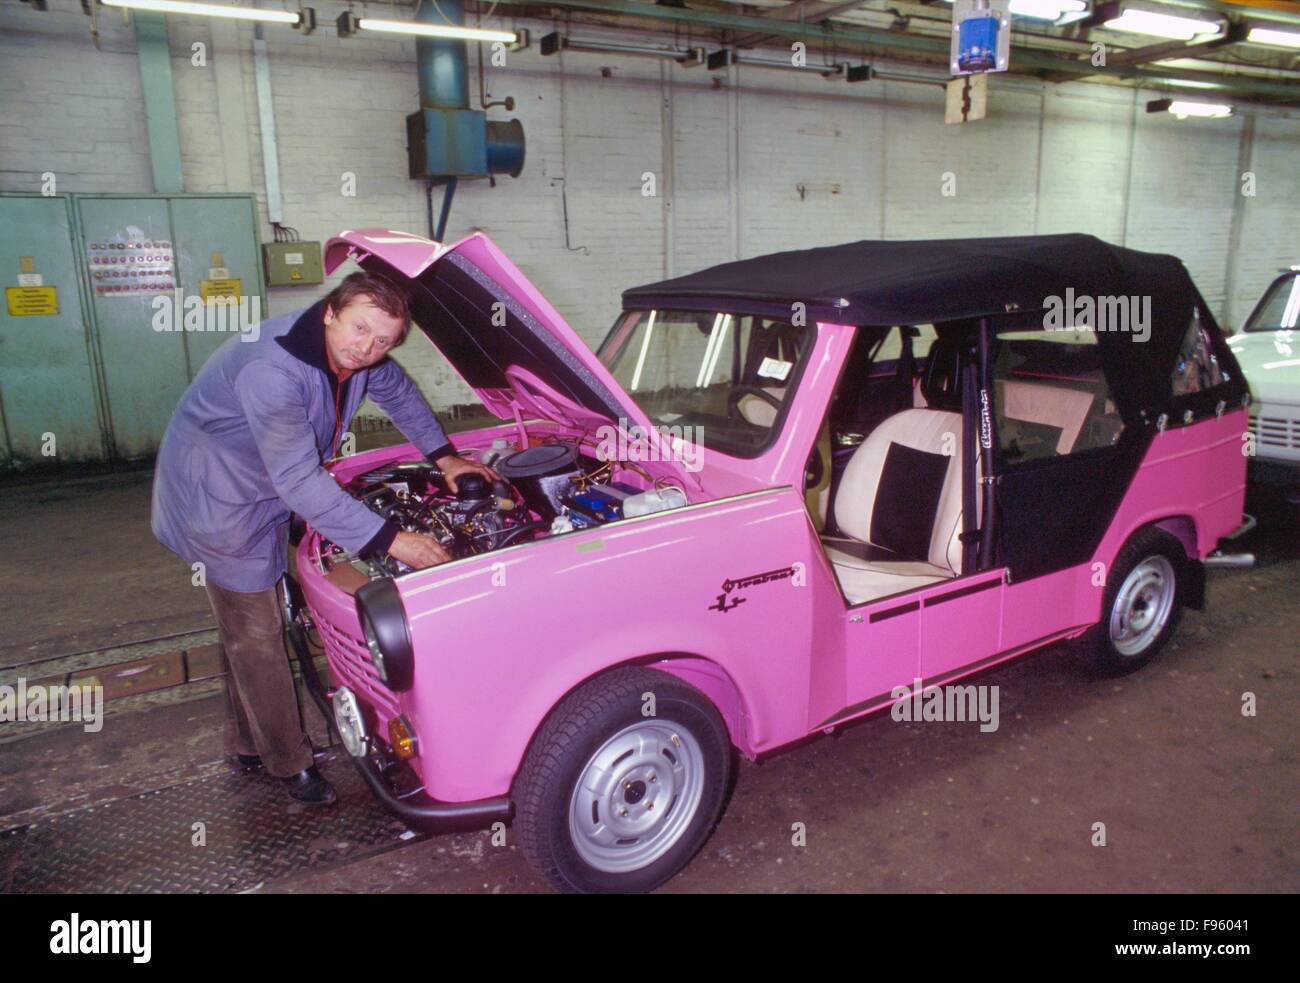 30/04/1991 - Ceremony for the last Trabant cars that leave the factory VEB Sachsenring Zwickau Automobilwerke after reunification between the German Democratic Republic (DDR) and the Federal Republic of Germany (BRD) Stock Photo